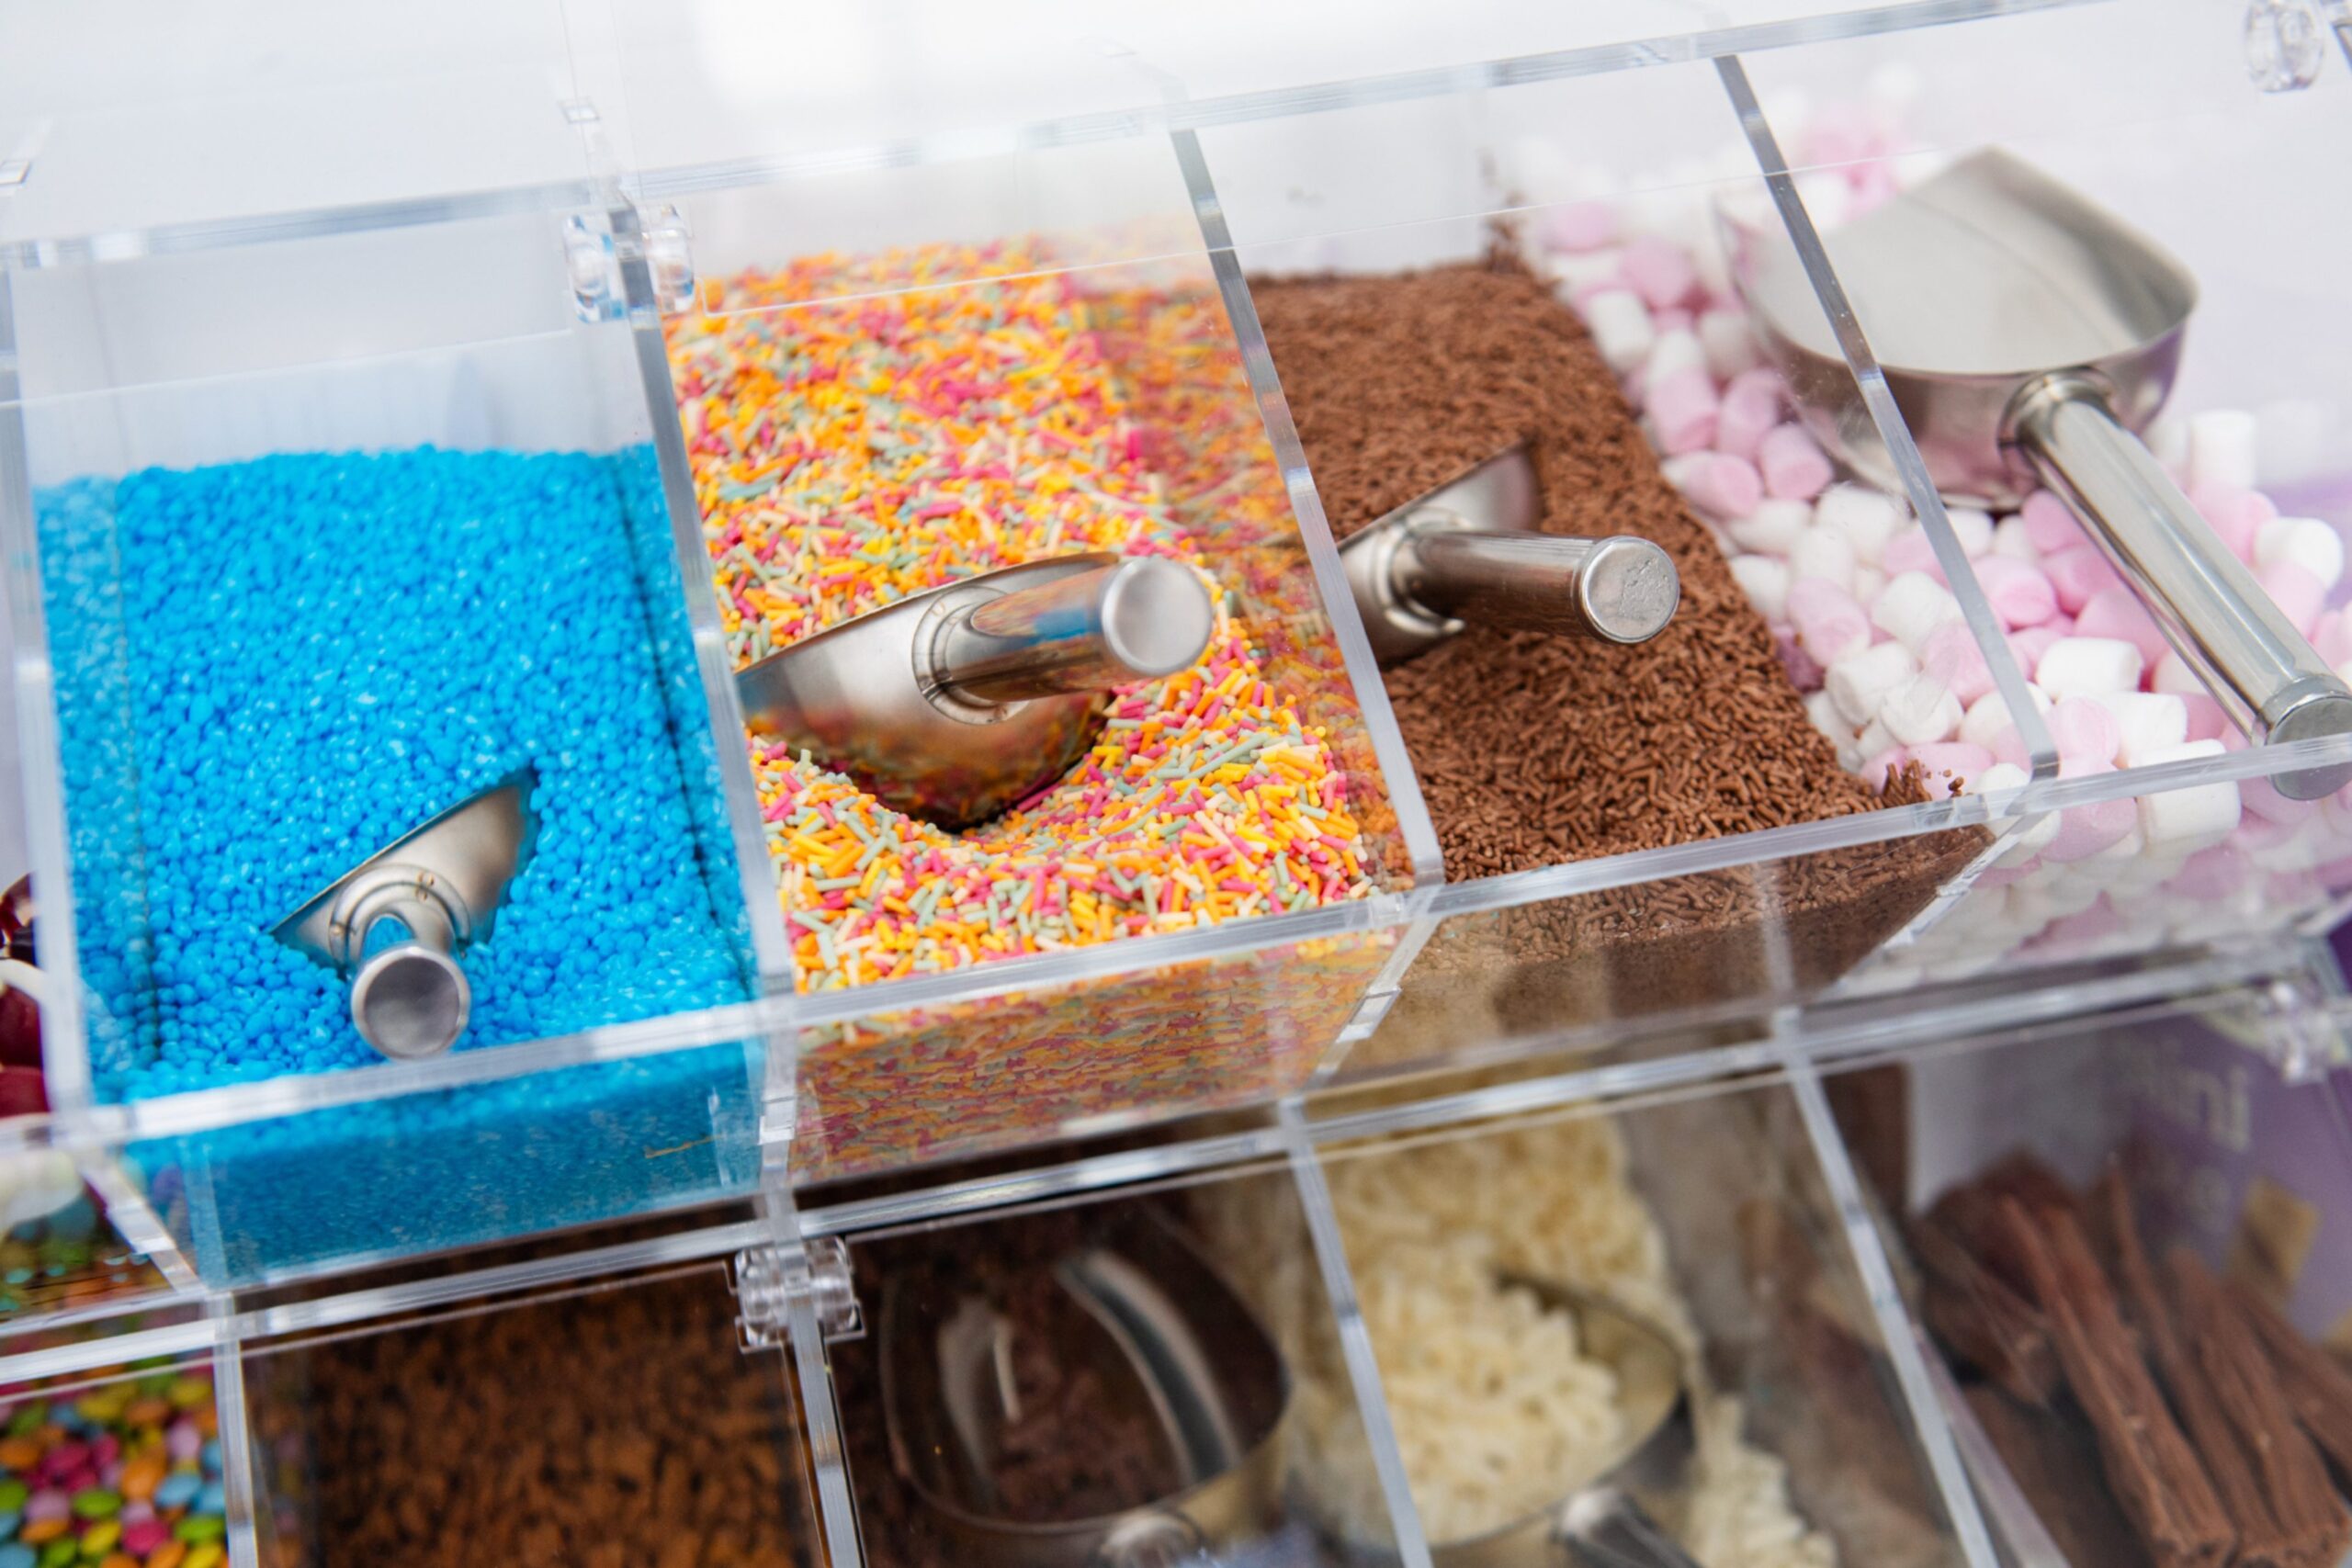 A selection of ice cream toppings including marshmallows and sprinkles